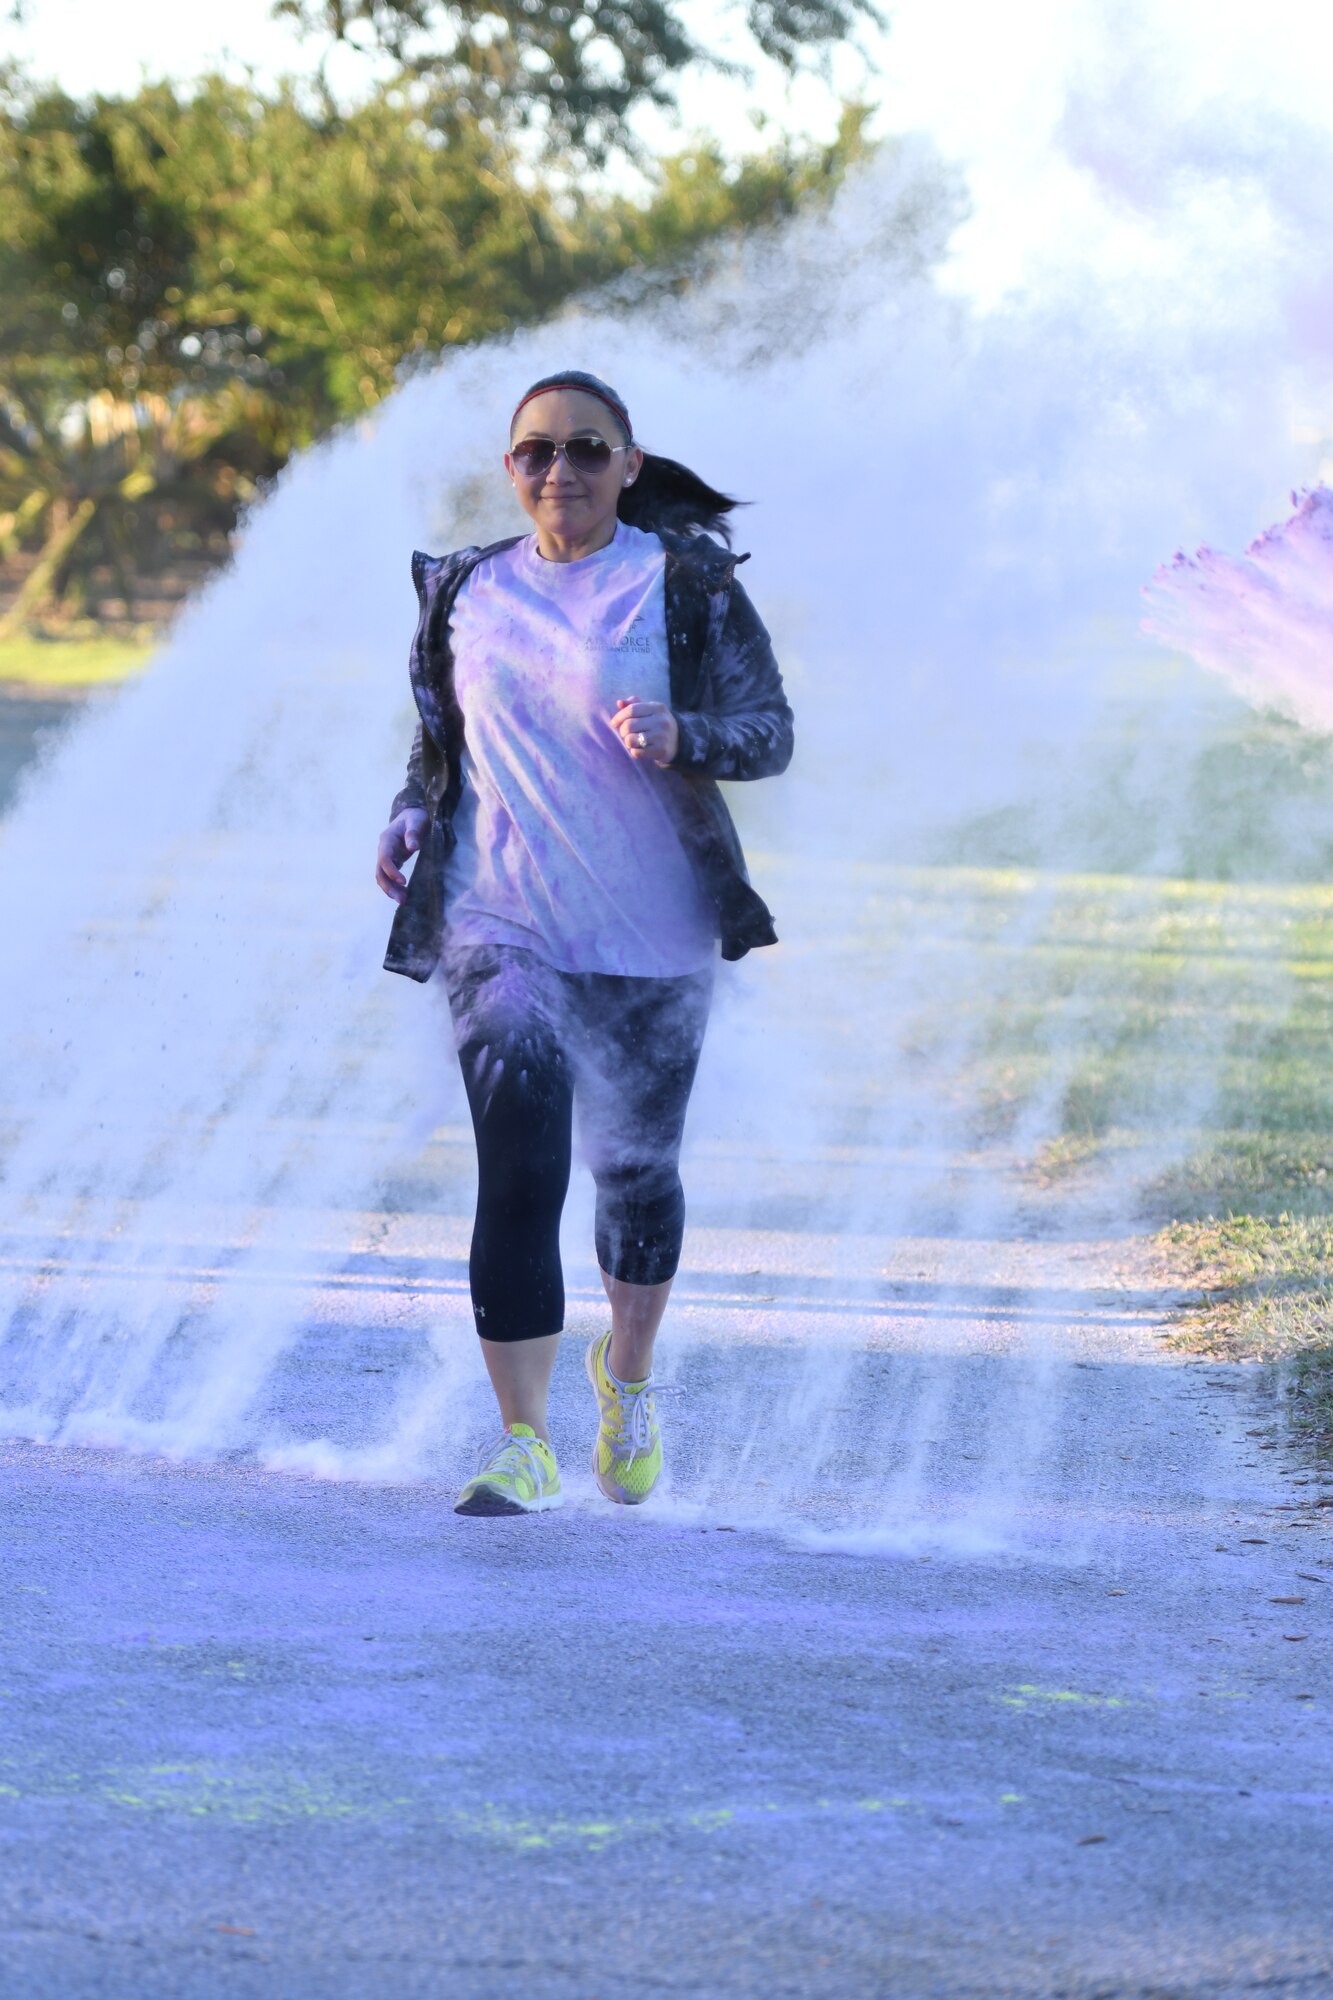 U.S. Air Force Tech. Sgt. Cecile Chatman, 81st Medical Support Squadron information systems NCO in charge, runs through purple powder during the Air Force Assistance Fund Color Run at Keesler Air Force Base, Mississippi, April 20, 2018. The AFAF raises funds for charitable affiliates that provide support to Air Force families in need. (U.S. Air Force photo by Kemberly Groue)